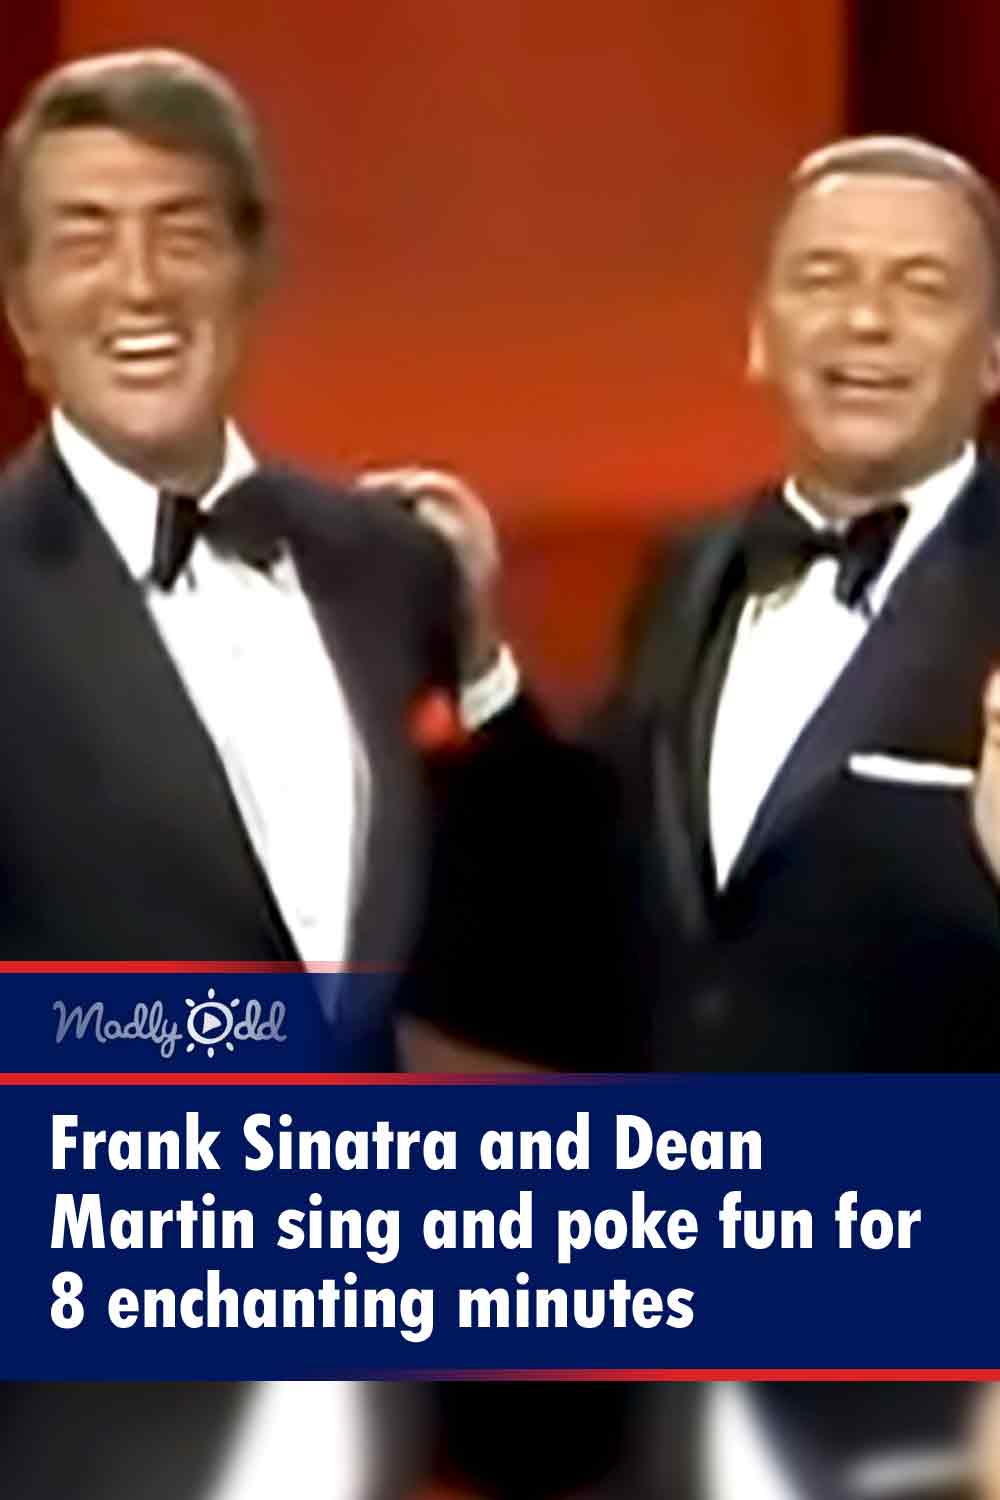 Frank Sinatra and Dean Martin sing and poke fun for 8 enchanting minutes